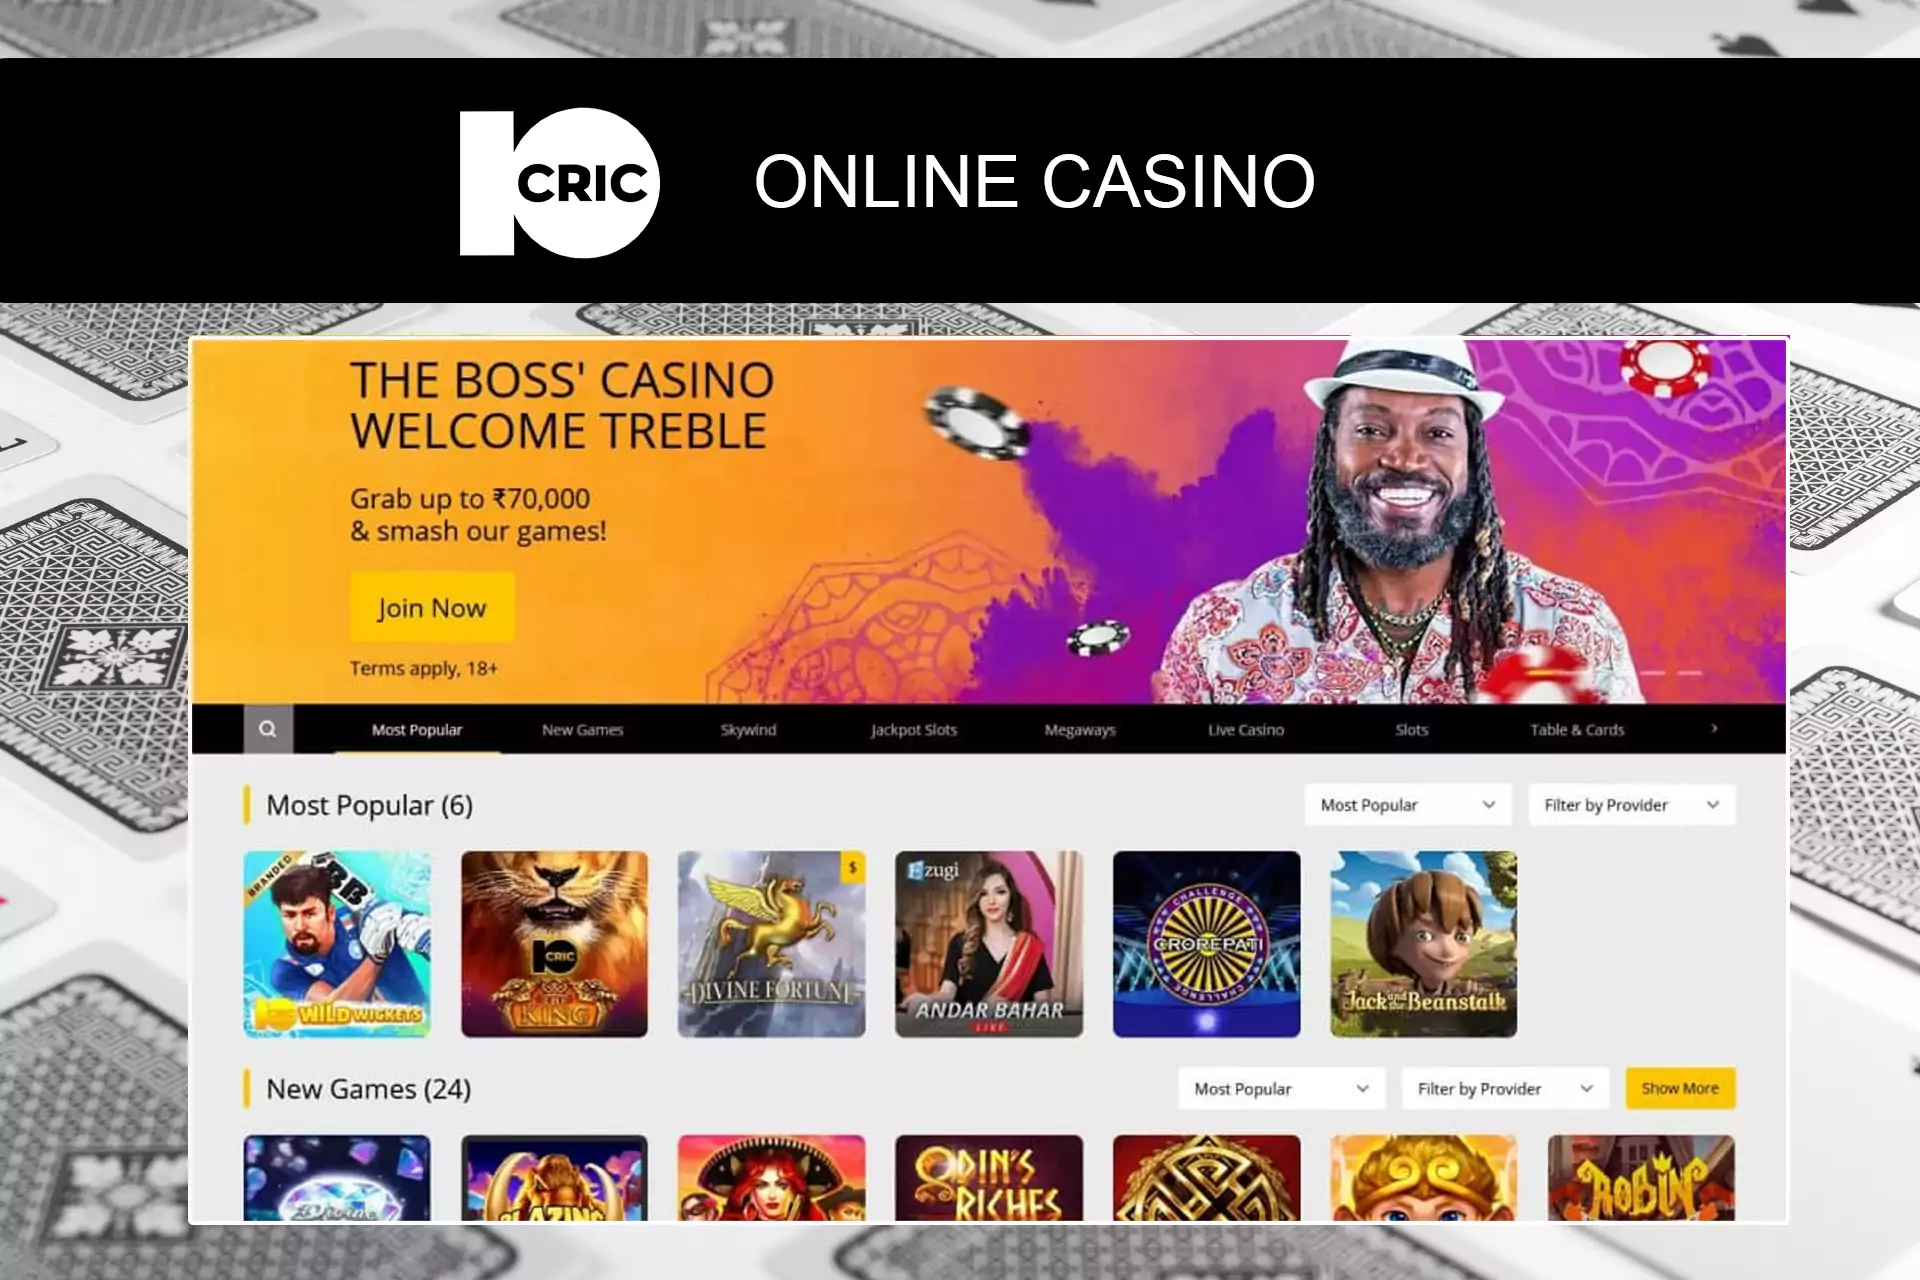 Casino fans can receive a special bonus and spend it playing games.